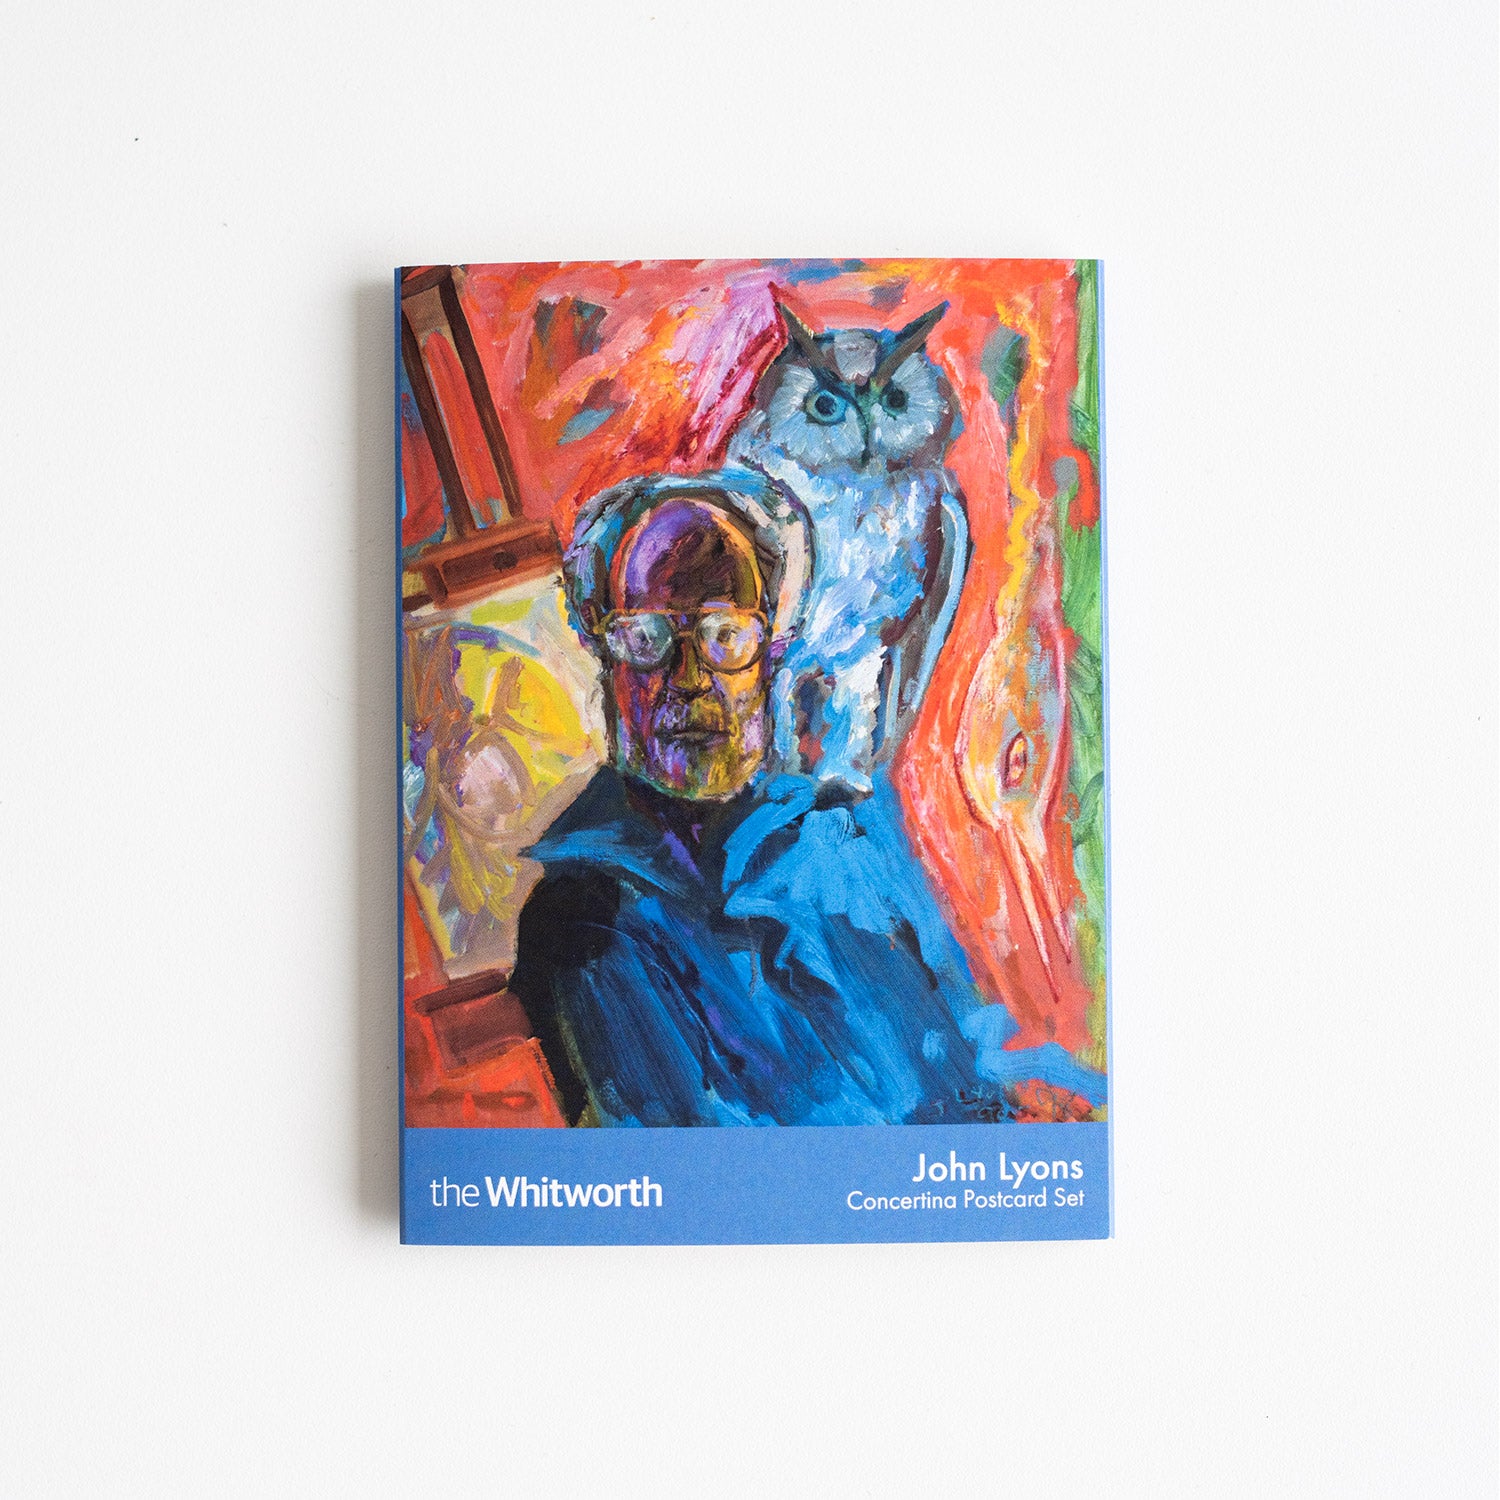 Front cover of concertina postcard pack featuring a self portrait painting by John Lyons